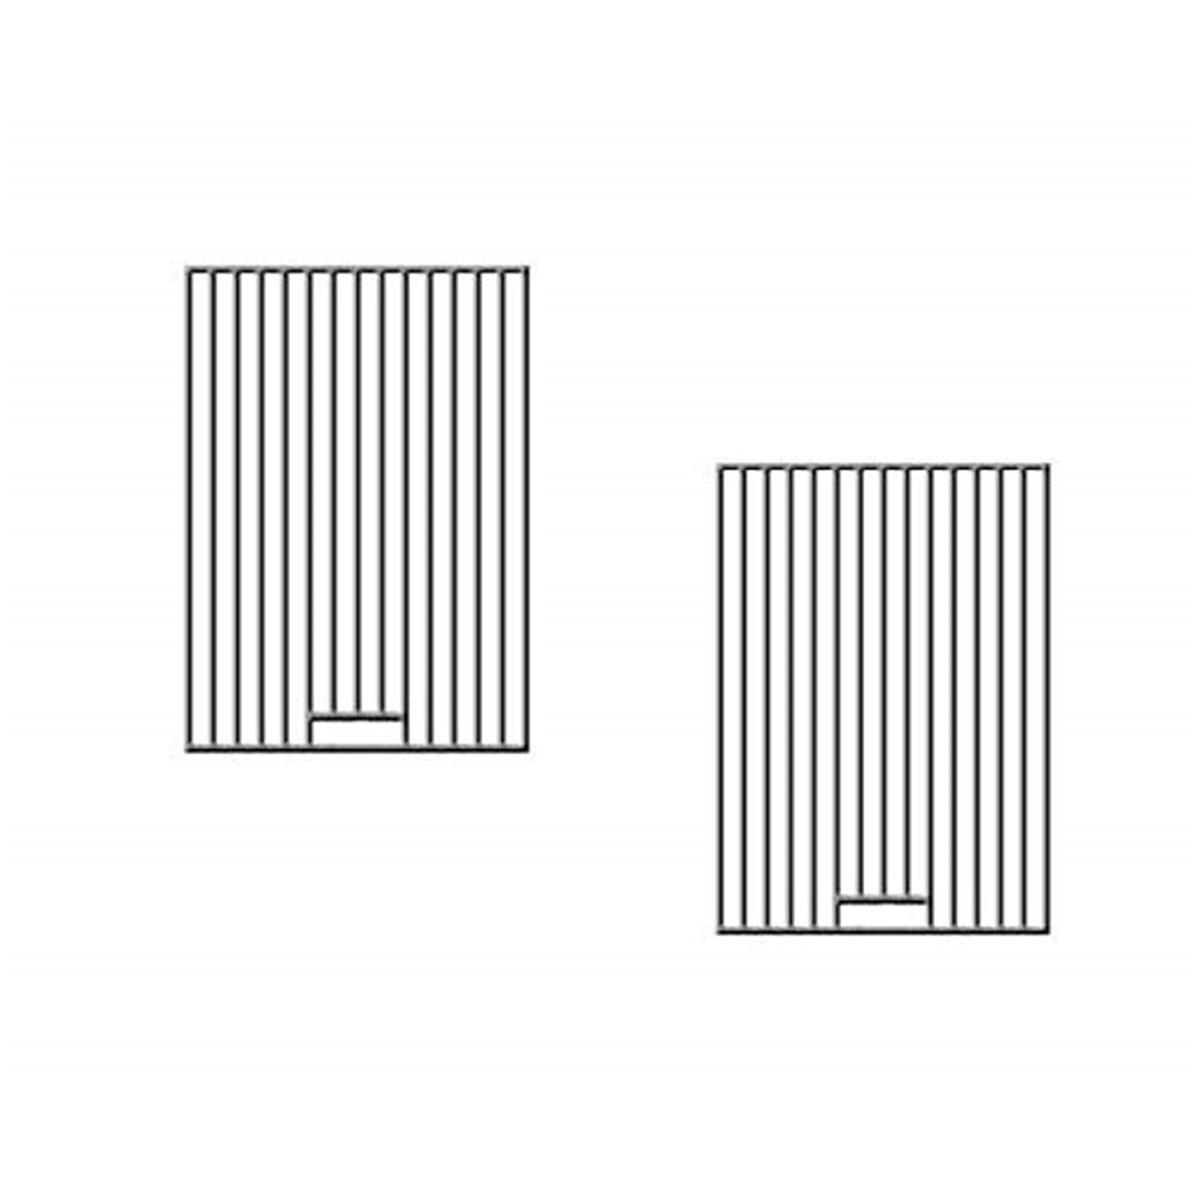 24-b-11a Stainless Steel Diamond Sear Cooking Grids, Set Of 2